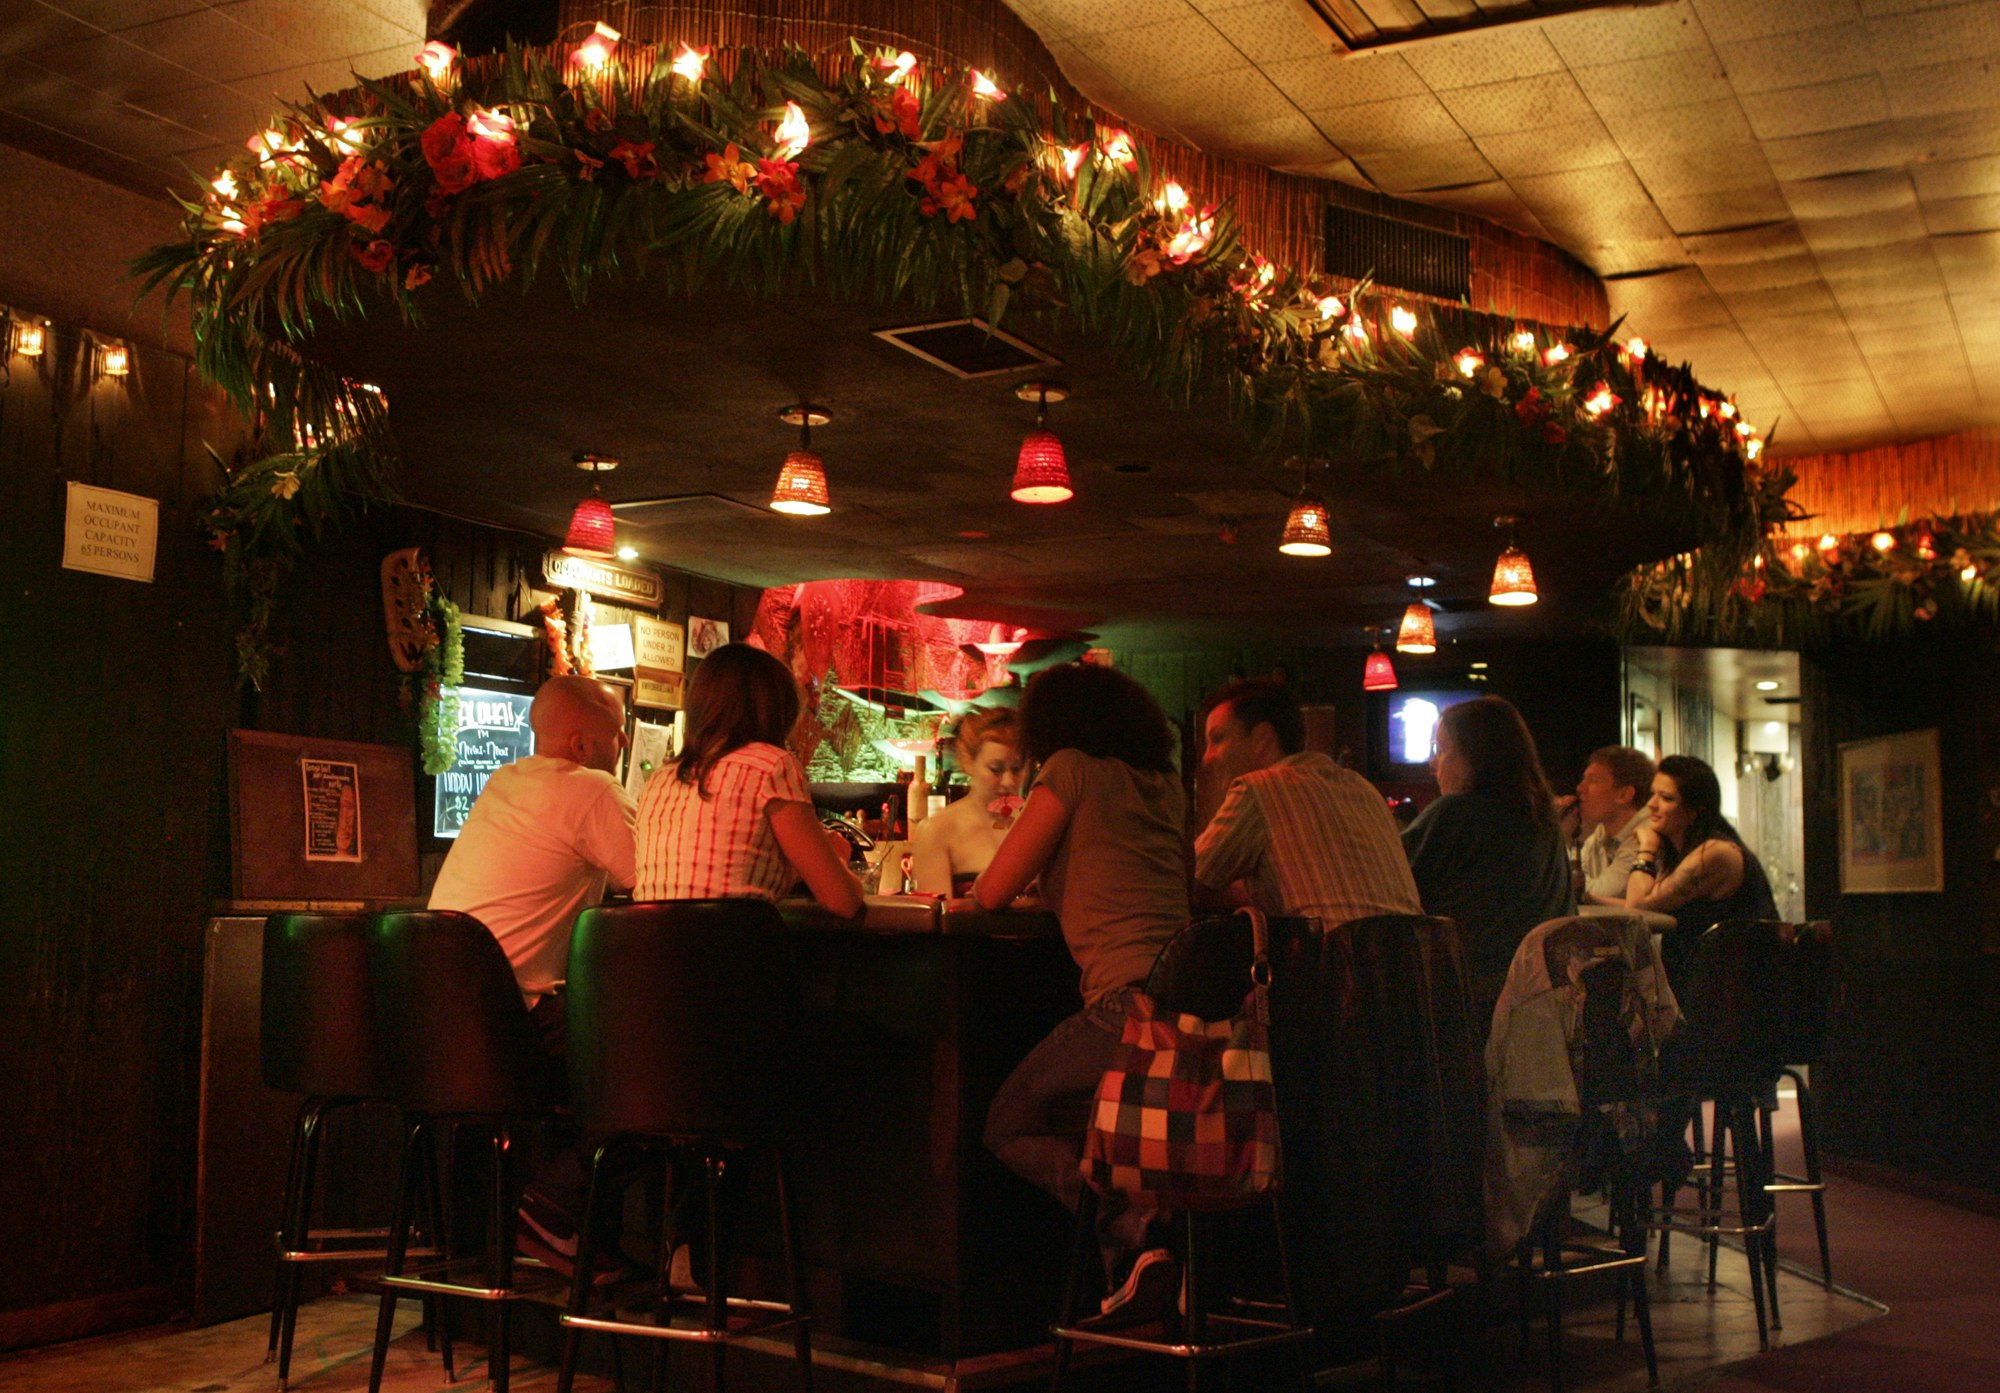 Six patrons sit around the bar at Tonga Hut in Los Angeles, where red tropical flowers are intertwined in a palm frond garland studded with lights over mid-century style barstools